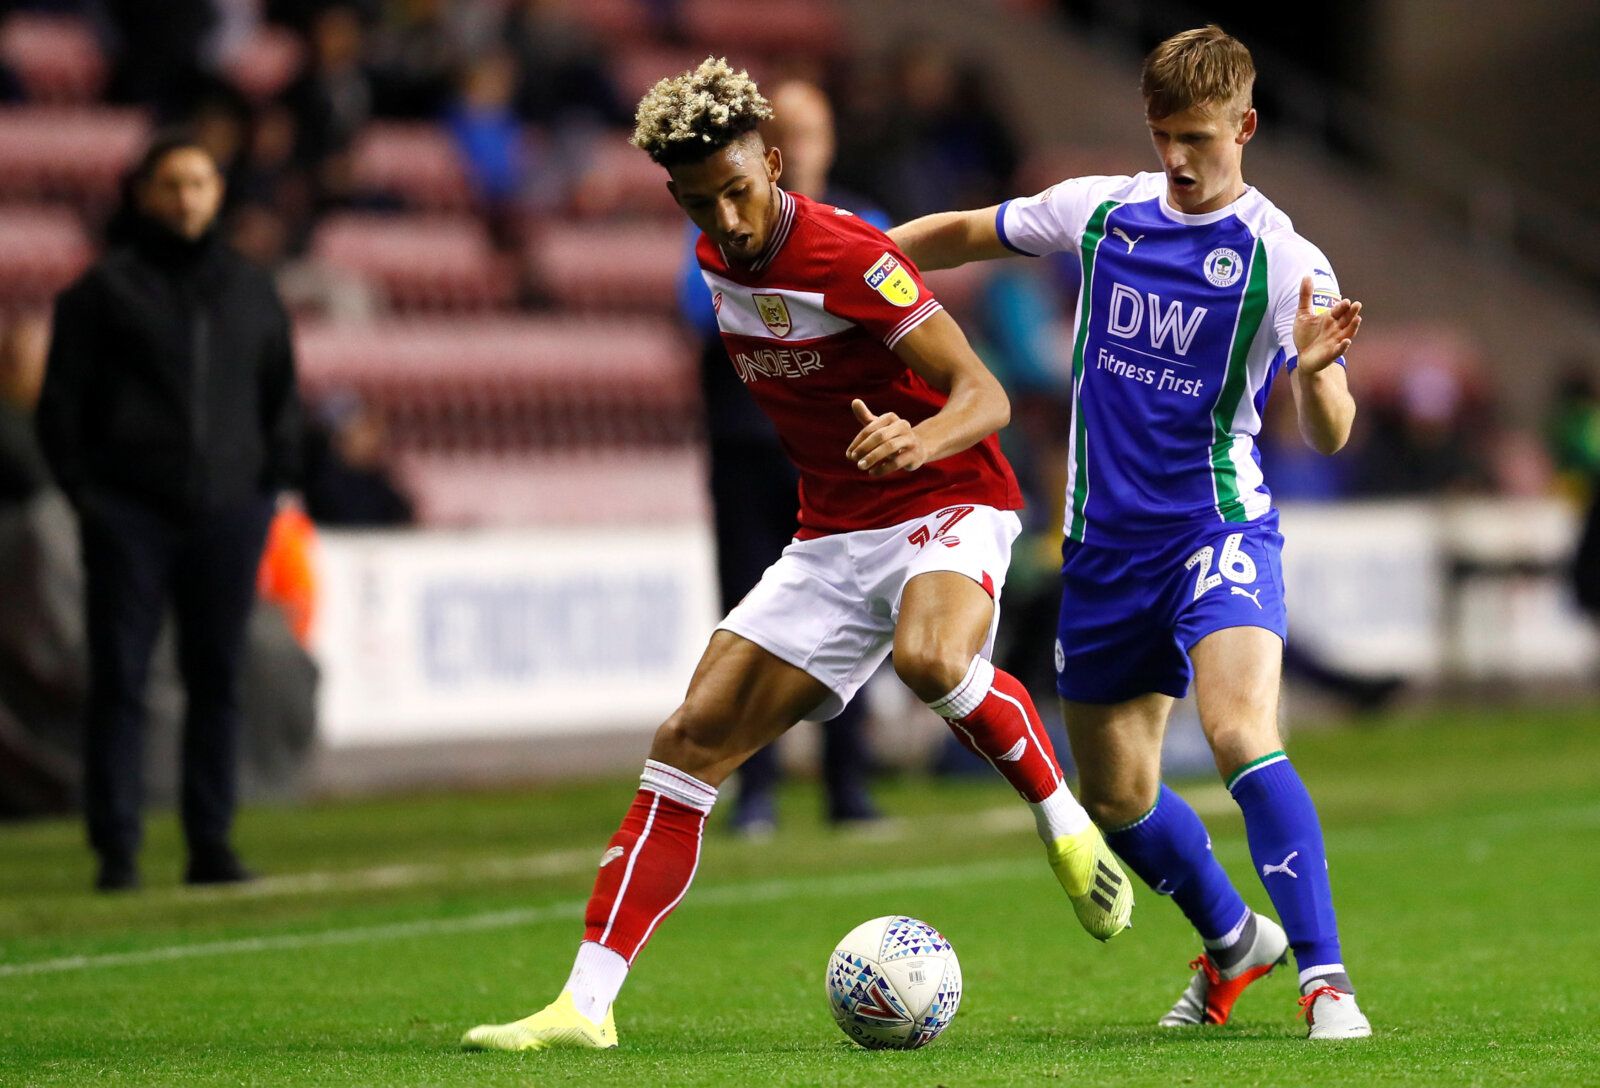 Soccer Football - Championship - Wigan Athletic v Bristol City - DW Stadium, Wigan, Britain - September 21, 2018   Bristol City's Lloyd Kelly in action with Wigan Athletic's Callum Connolly   Action Images/Jason Cairnduff    EDITORIAL USE ONLY. No use with unauthorized audio, video, data, fixture lists, club/league logos or 